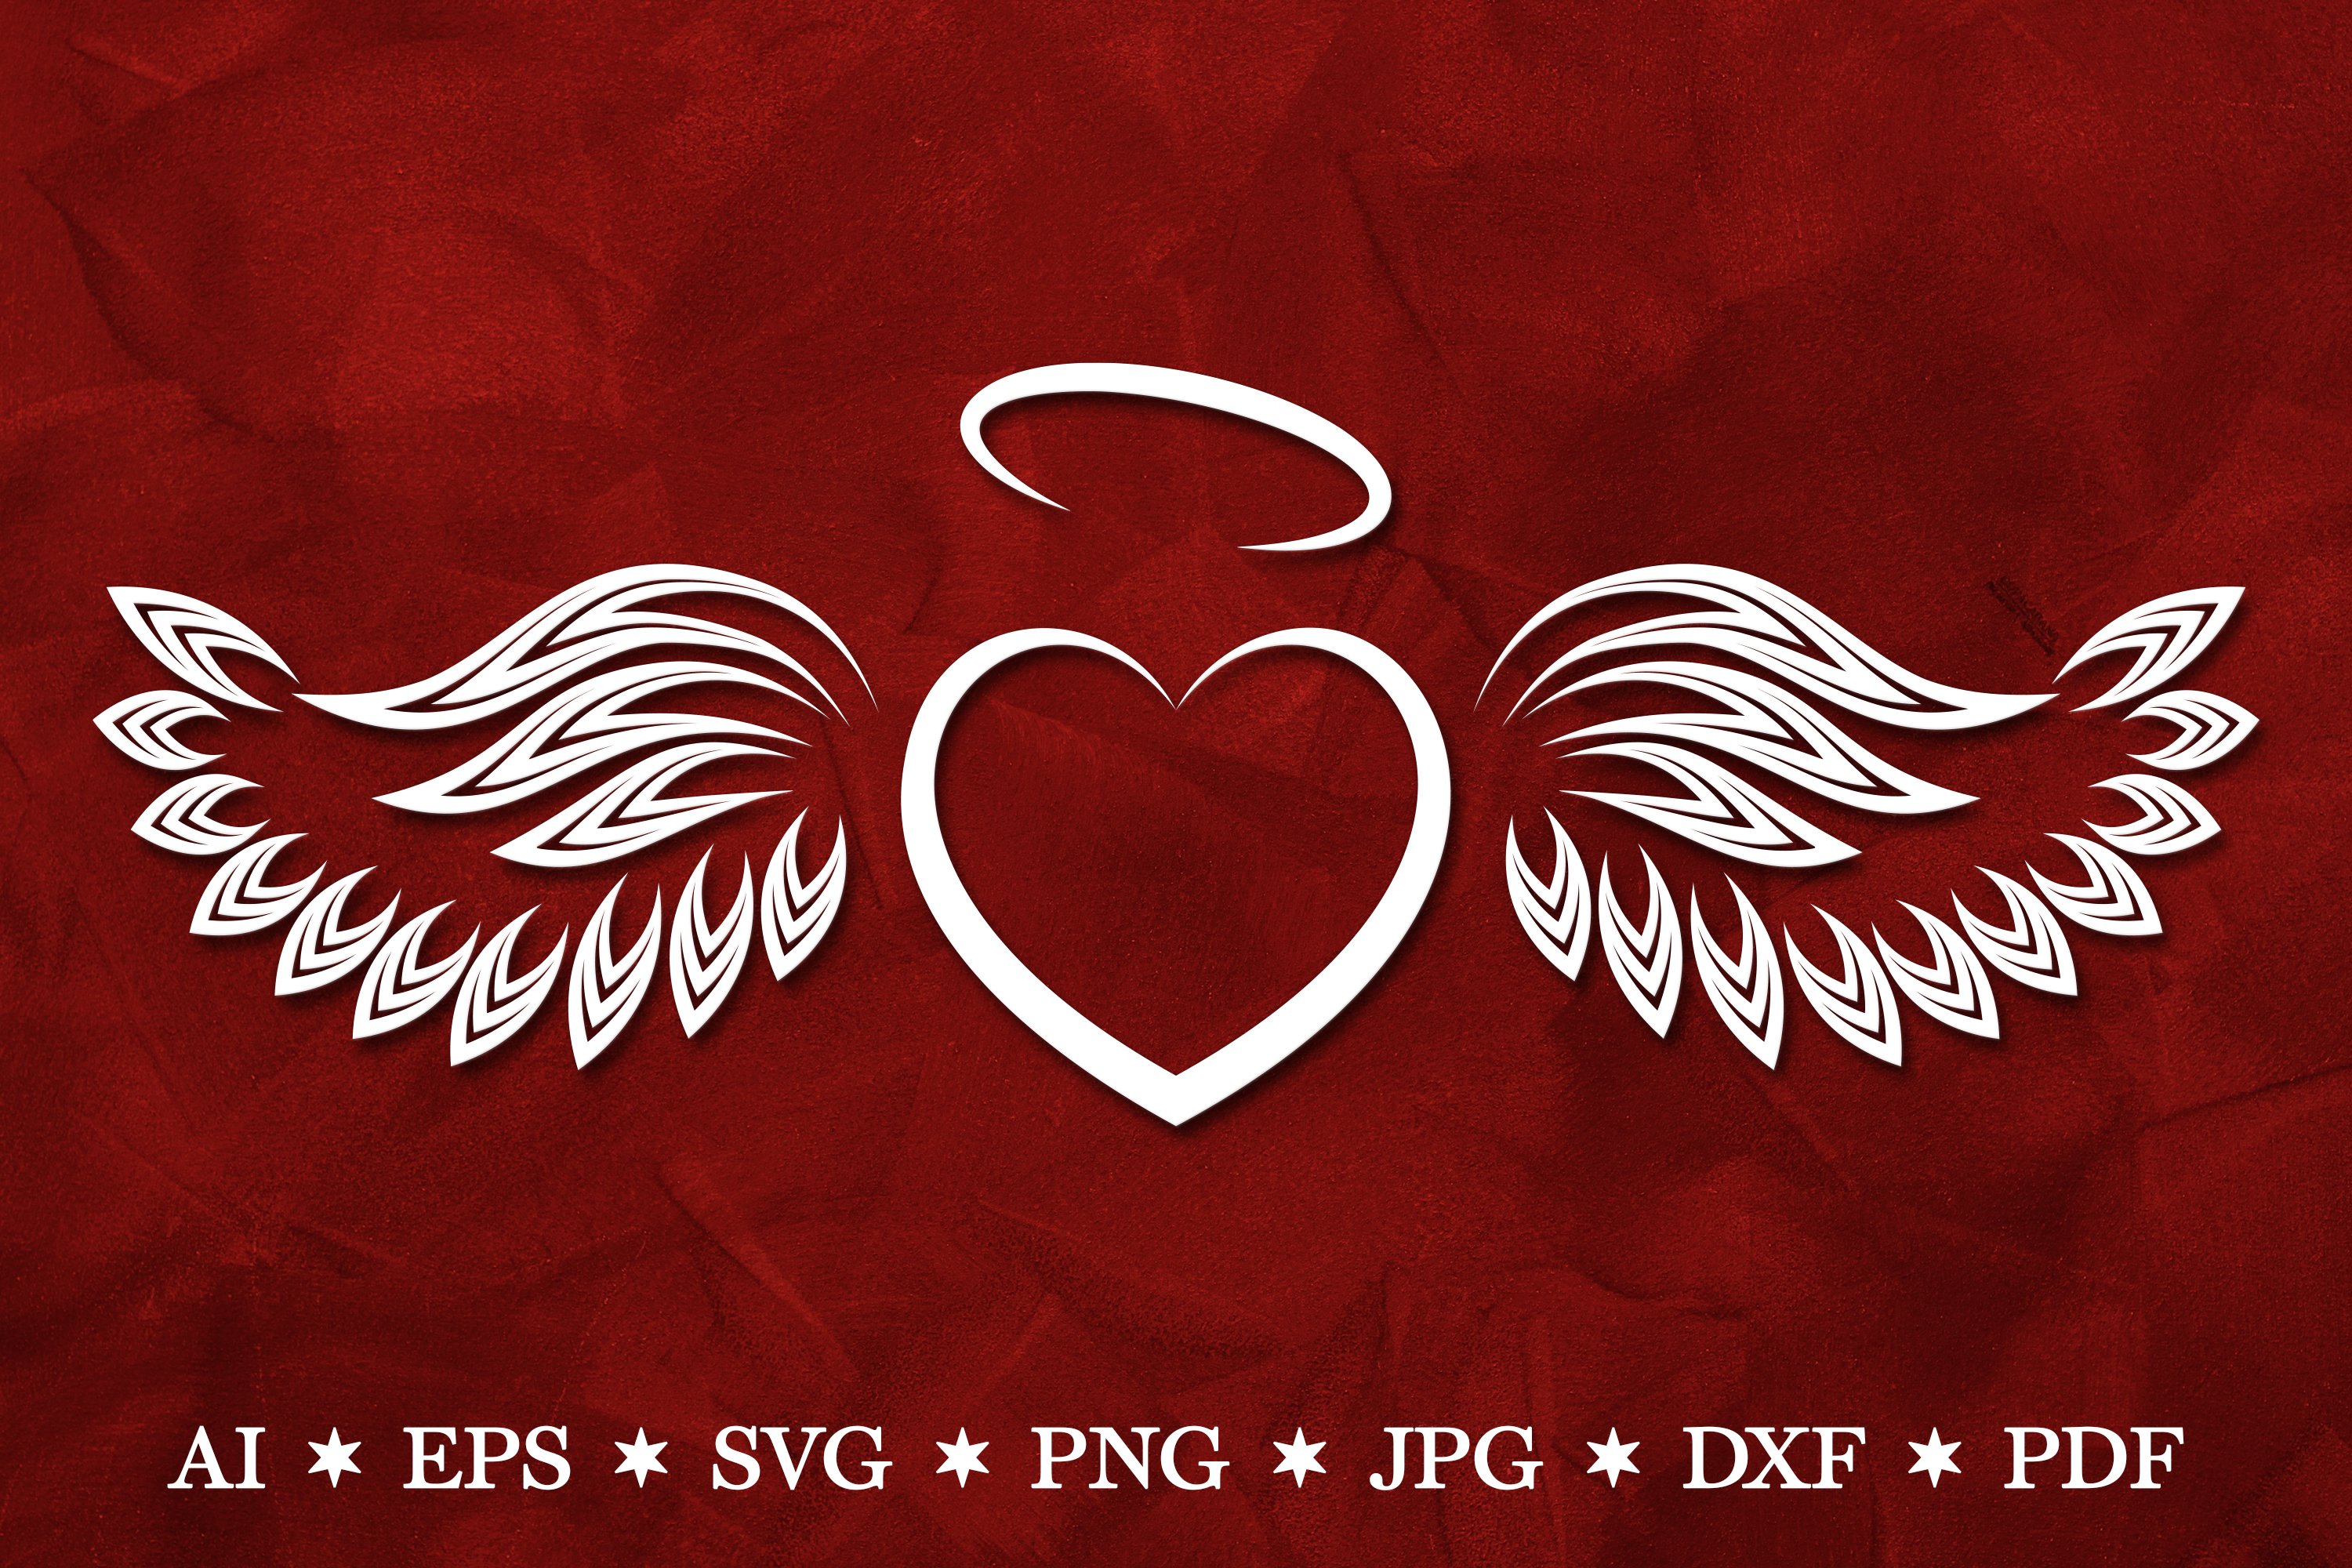 A heart with angel wings on a red background.